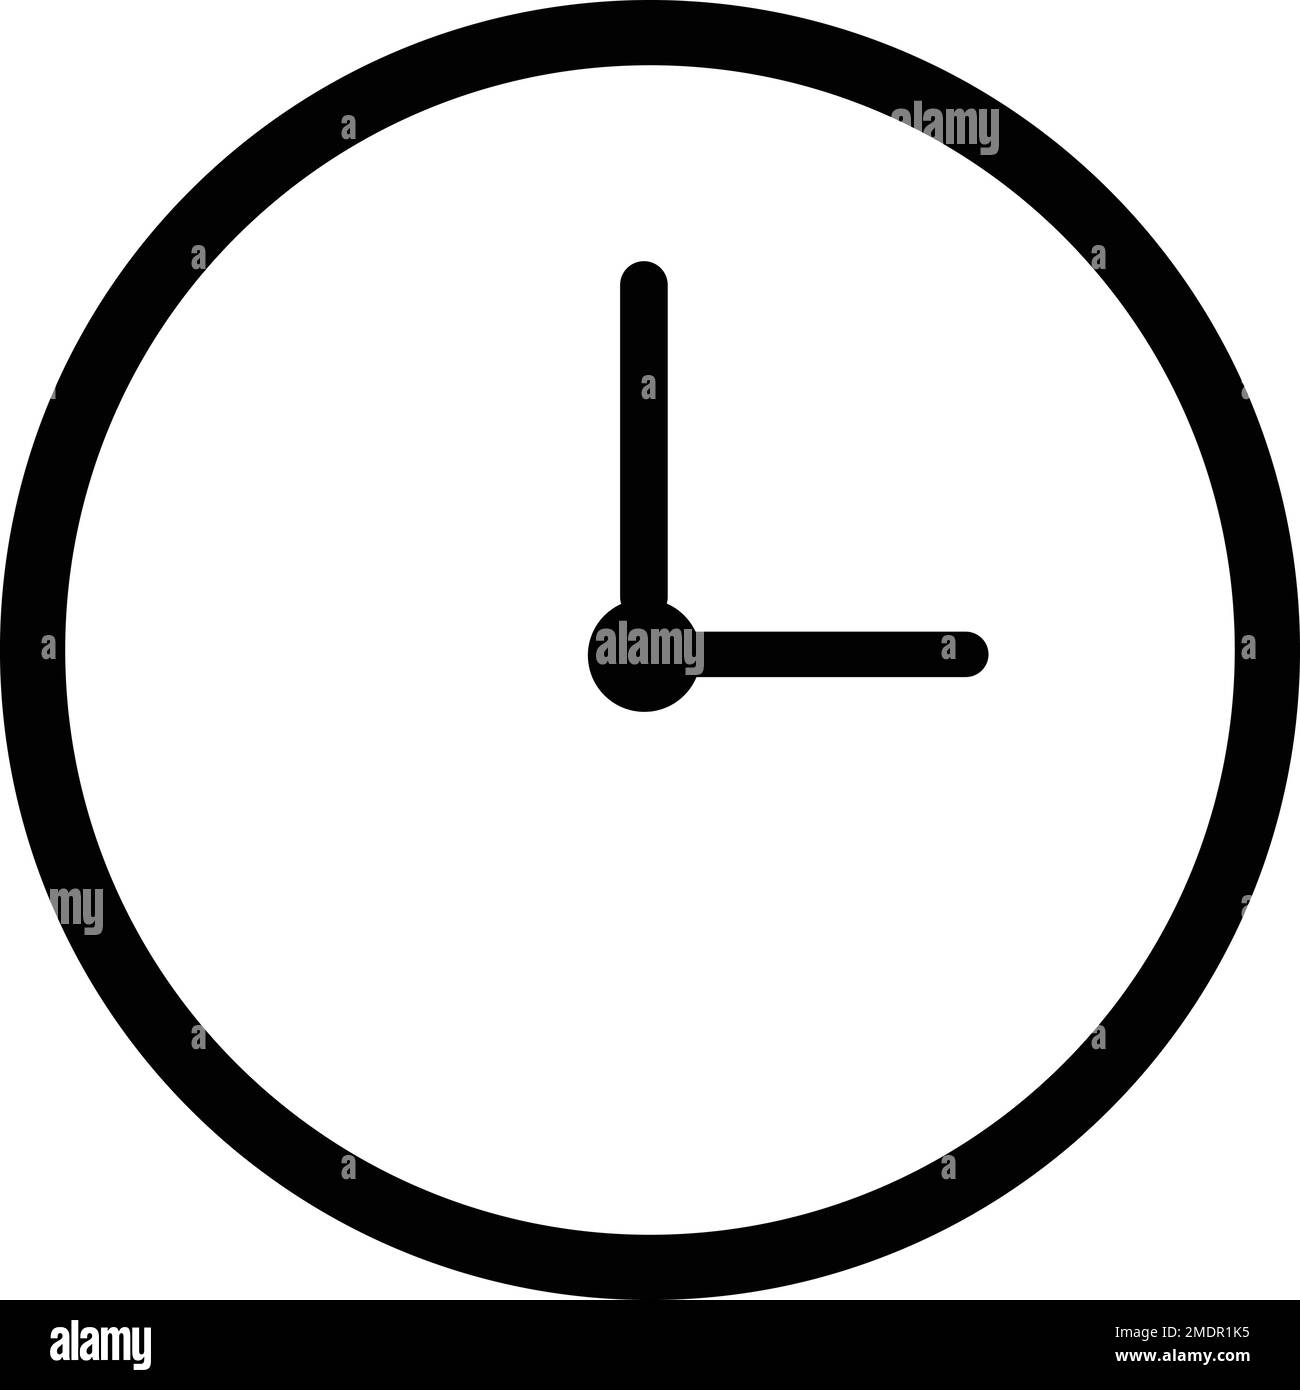 Simple time clock analog vector icon, Watch symbol Stock Vector